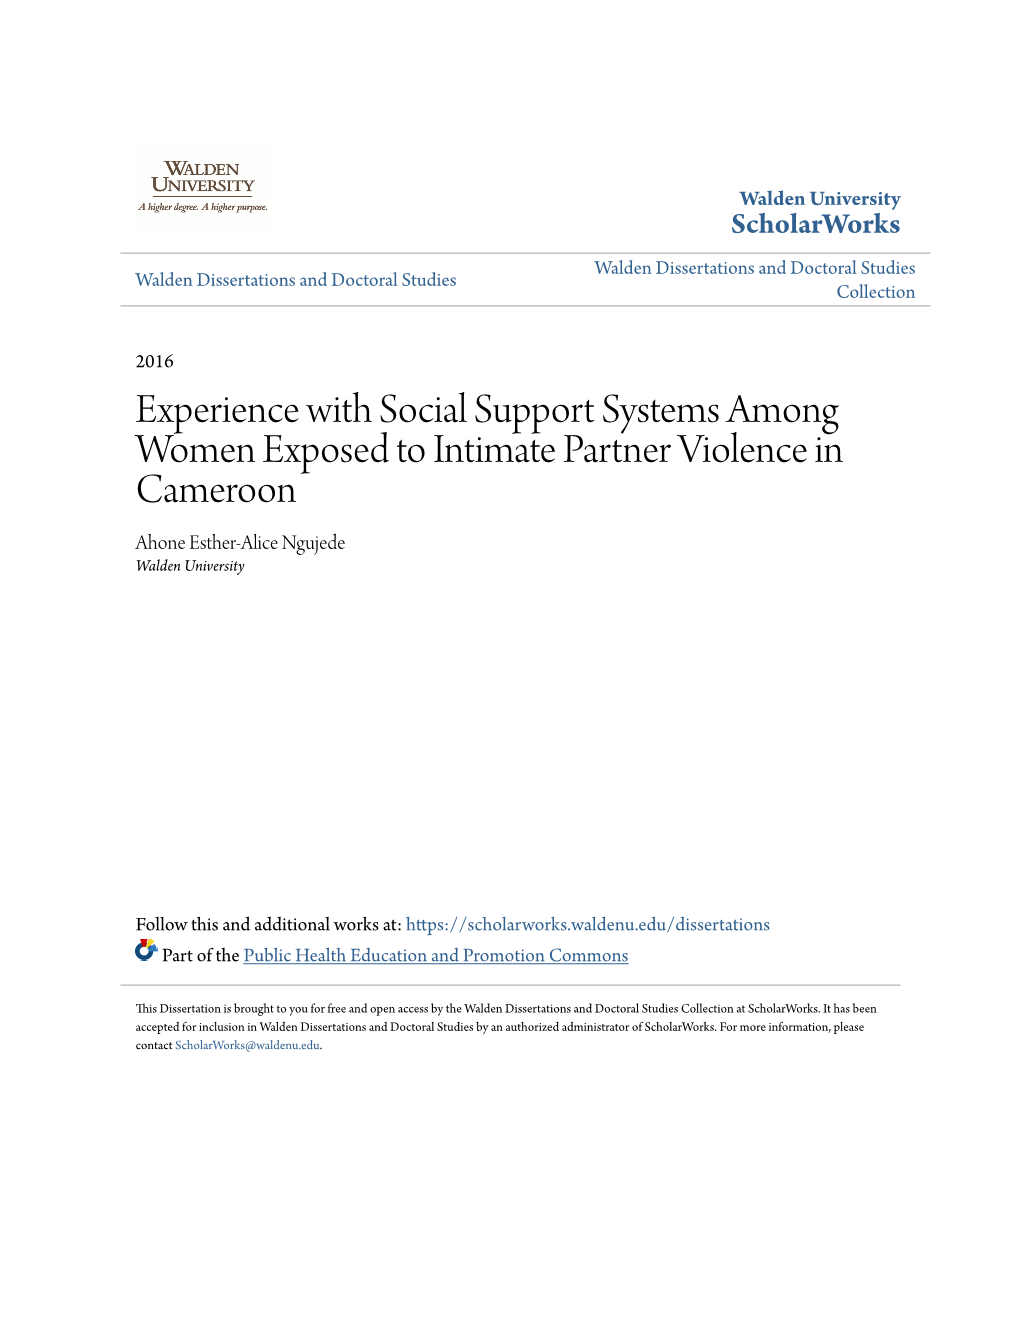 Experience with Social Support Systems Among Women Exposed to Intimate Partner Violence in Cameroon Ahone Esther-Alice Ngujede Walden University